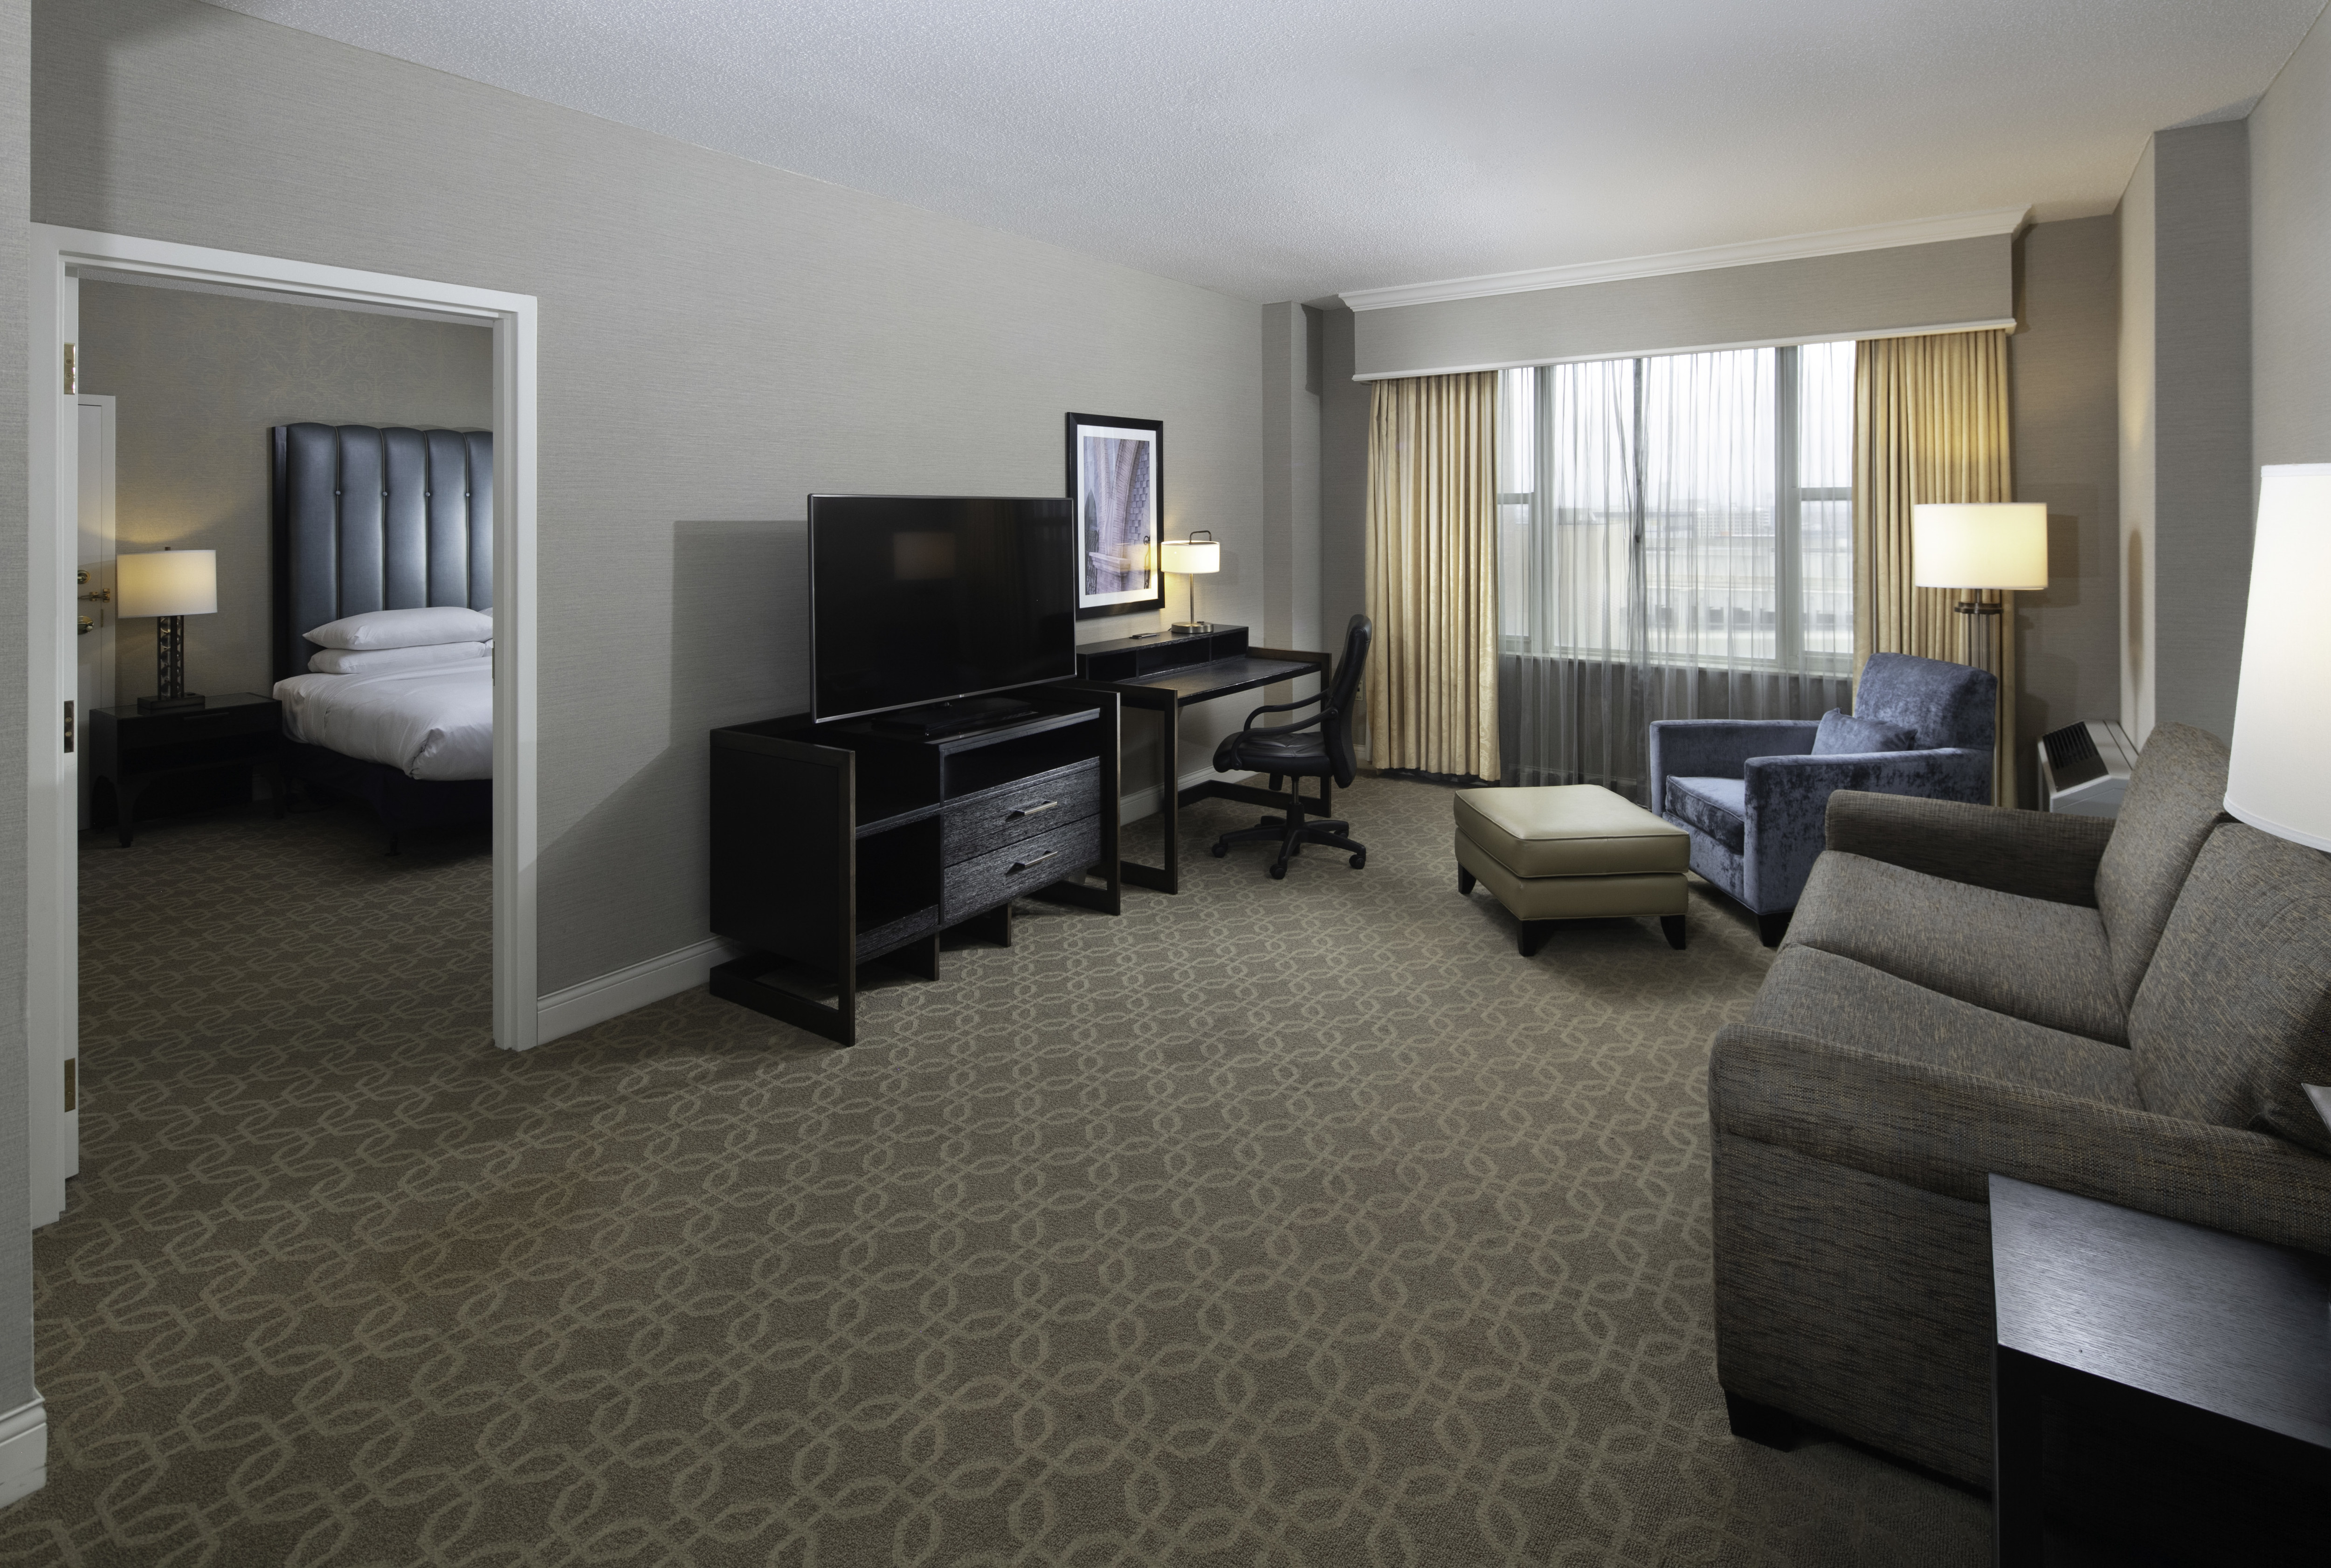 Executive King Suite with Work Desk